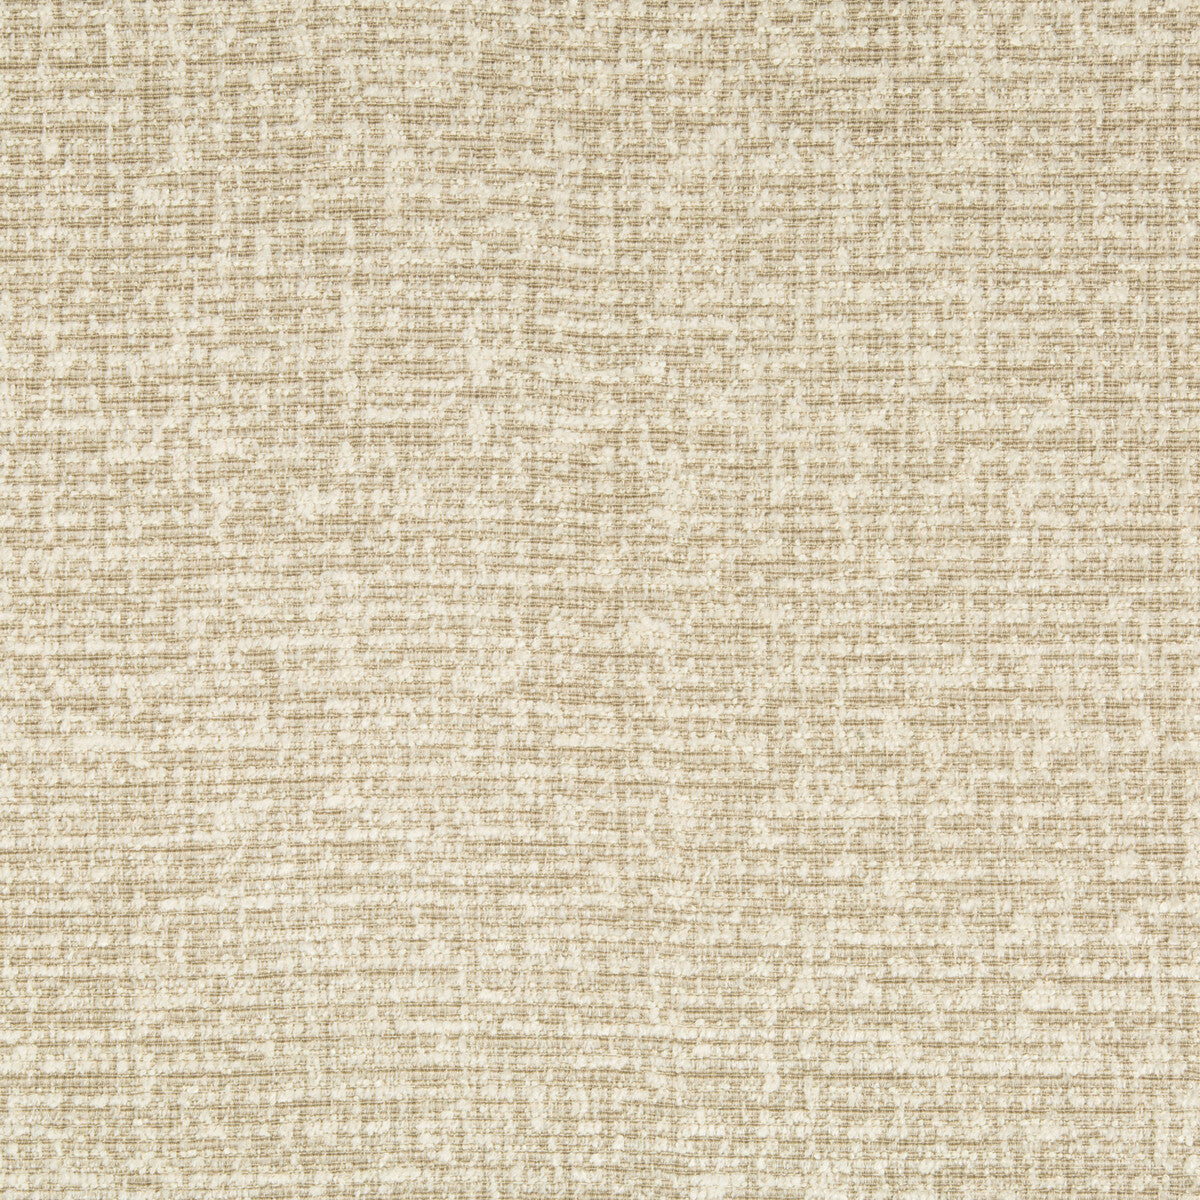 Kravet Contract fabric in 35242-16 color - pattern 35242.16.0 - by Kravet Contract in the Incase Crypton Gis collection